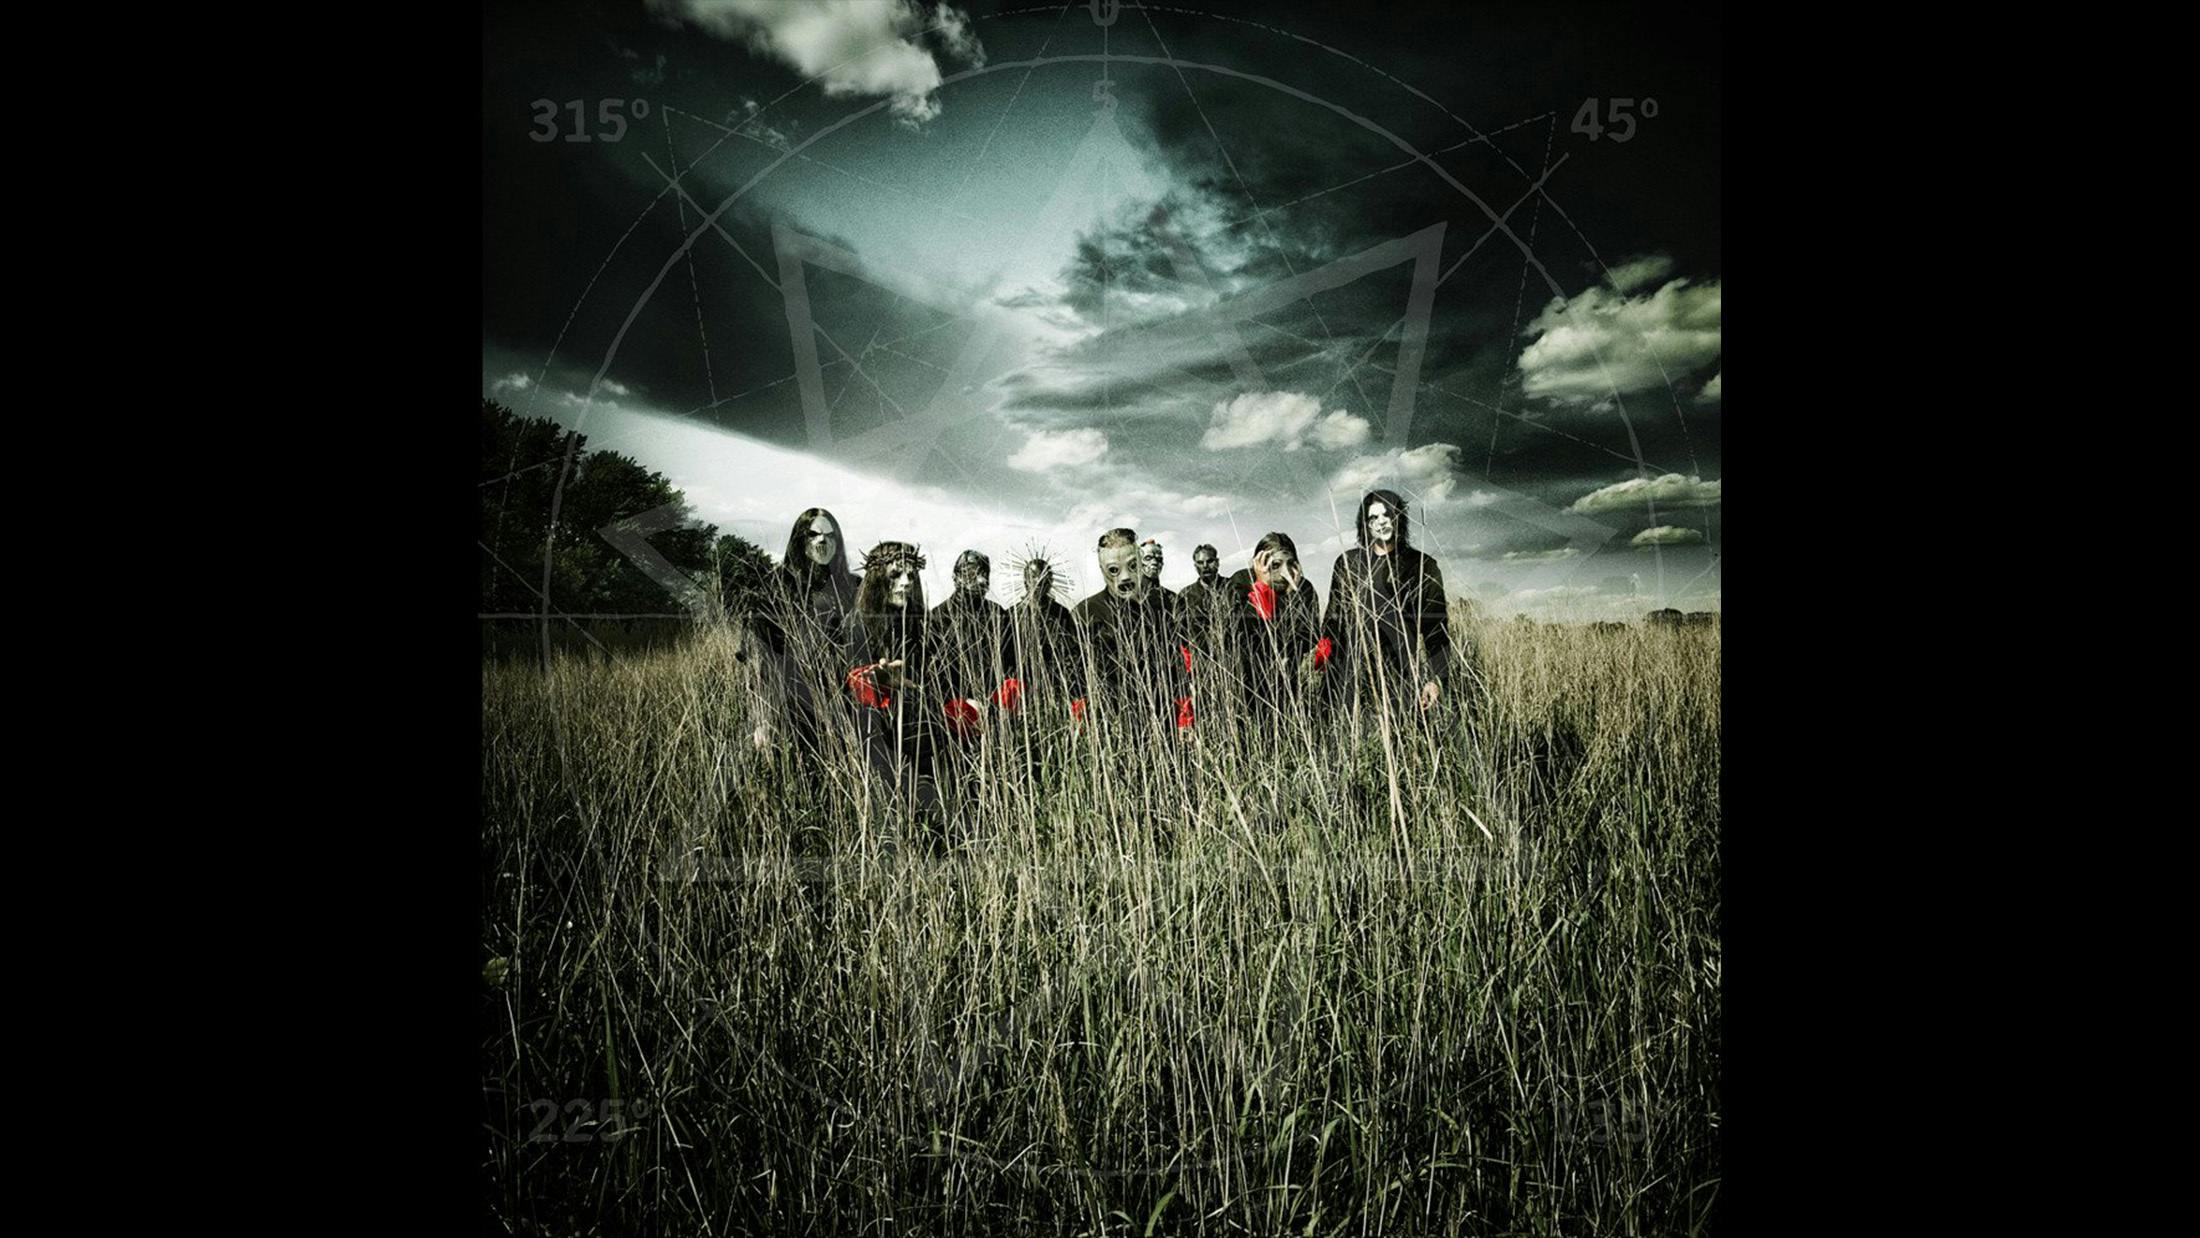 The importance of Slipknot’s fourth album is less obvious than its predecessors. Not as impactful as the nine-piece’s self-titled debut, as dark as 2001’s Iowa, or as experimental as 2004’s Vol. 3 (The Subliminal Verses); its significance is more emotional than artistic. Paul Gray passed away in May 2010, making All Hope Is Gone the last Slipknot album to feature the bassist/songwriter/founding member, and therefore altering the dynamic of the band forever.